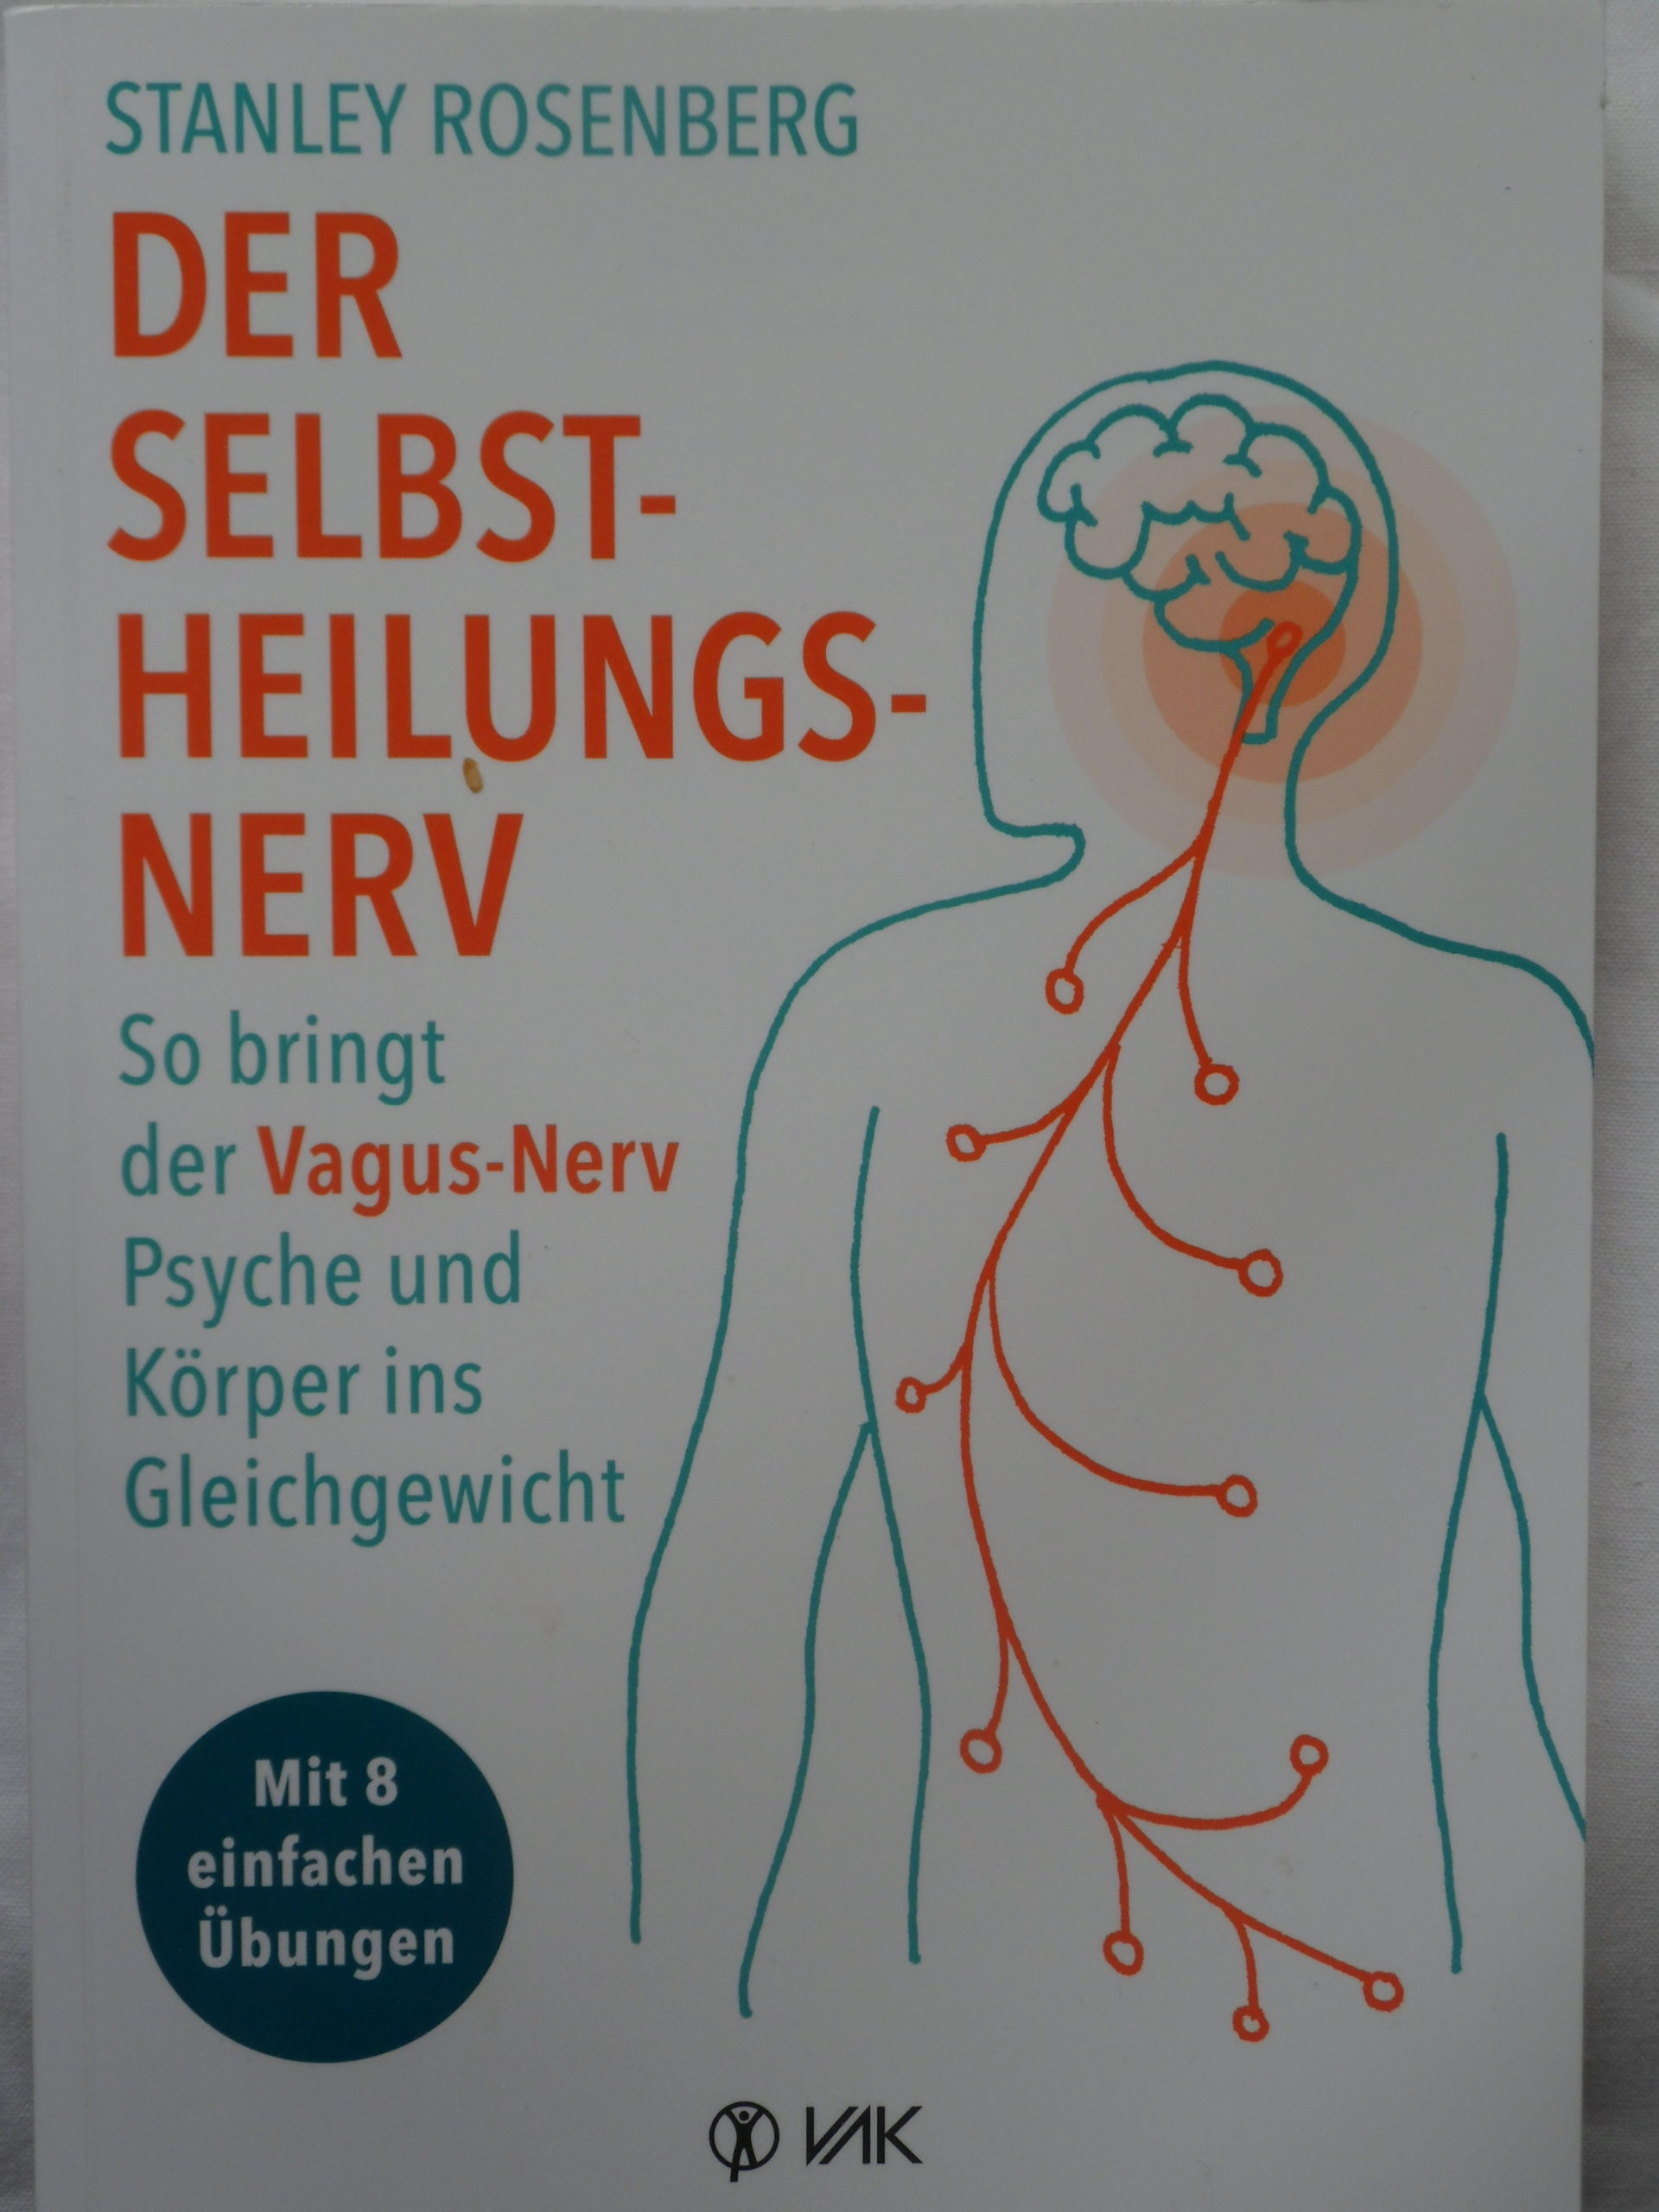 You are currently viewing Der Selbstheilungsnerv